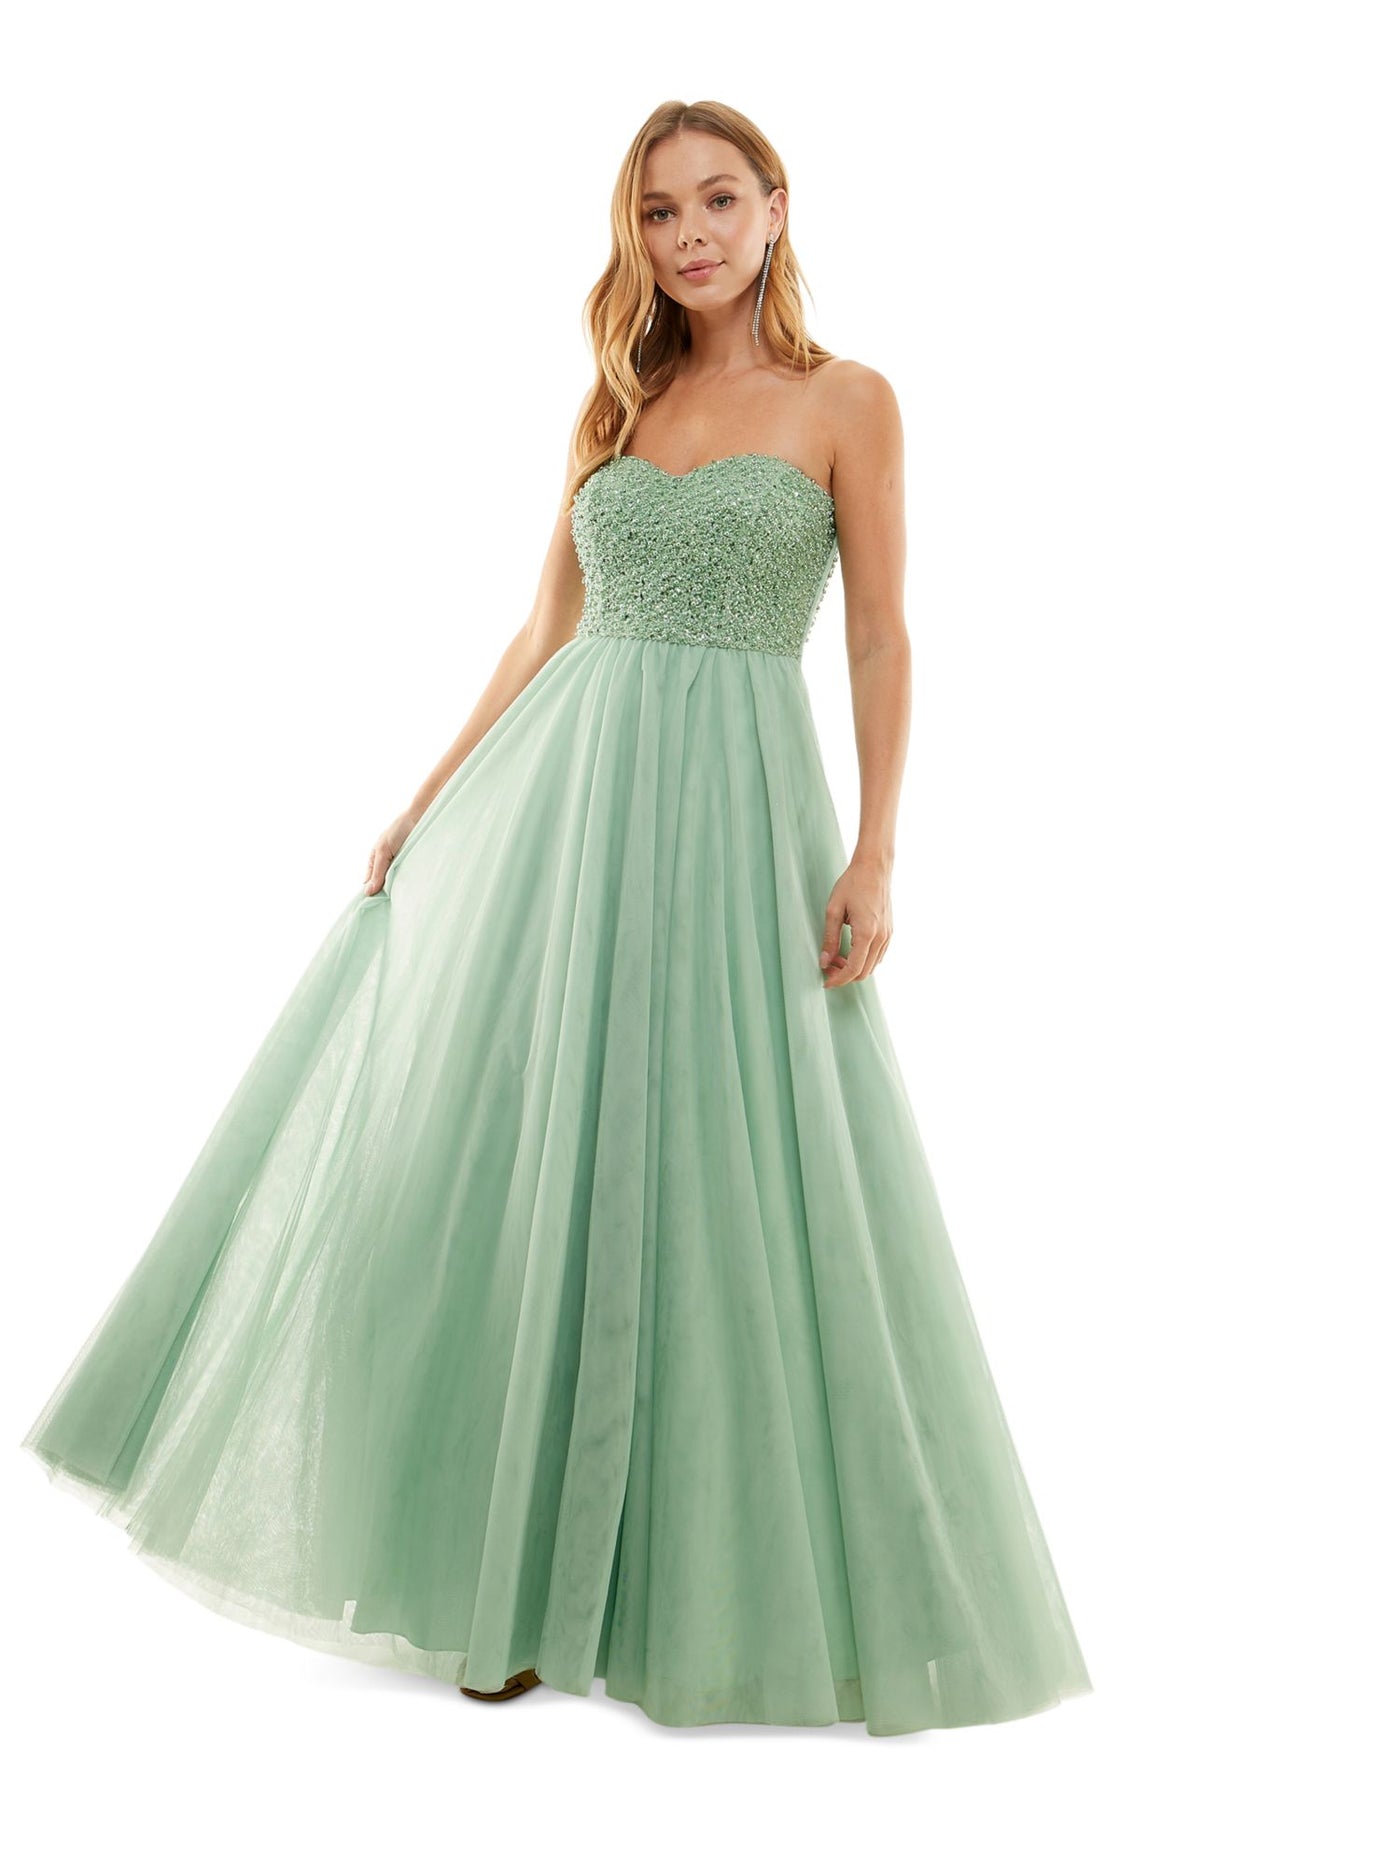 SAY YES TO THE PROM Womens Green Embellished Zippered Padded Lined Tulle Mesh Sleeveless Sweetheart Neckline Full-Length Party Gown Dress Juniors 13